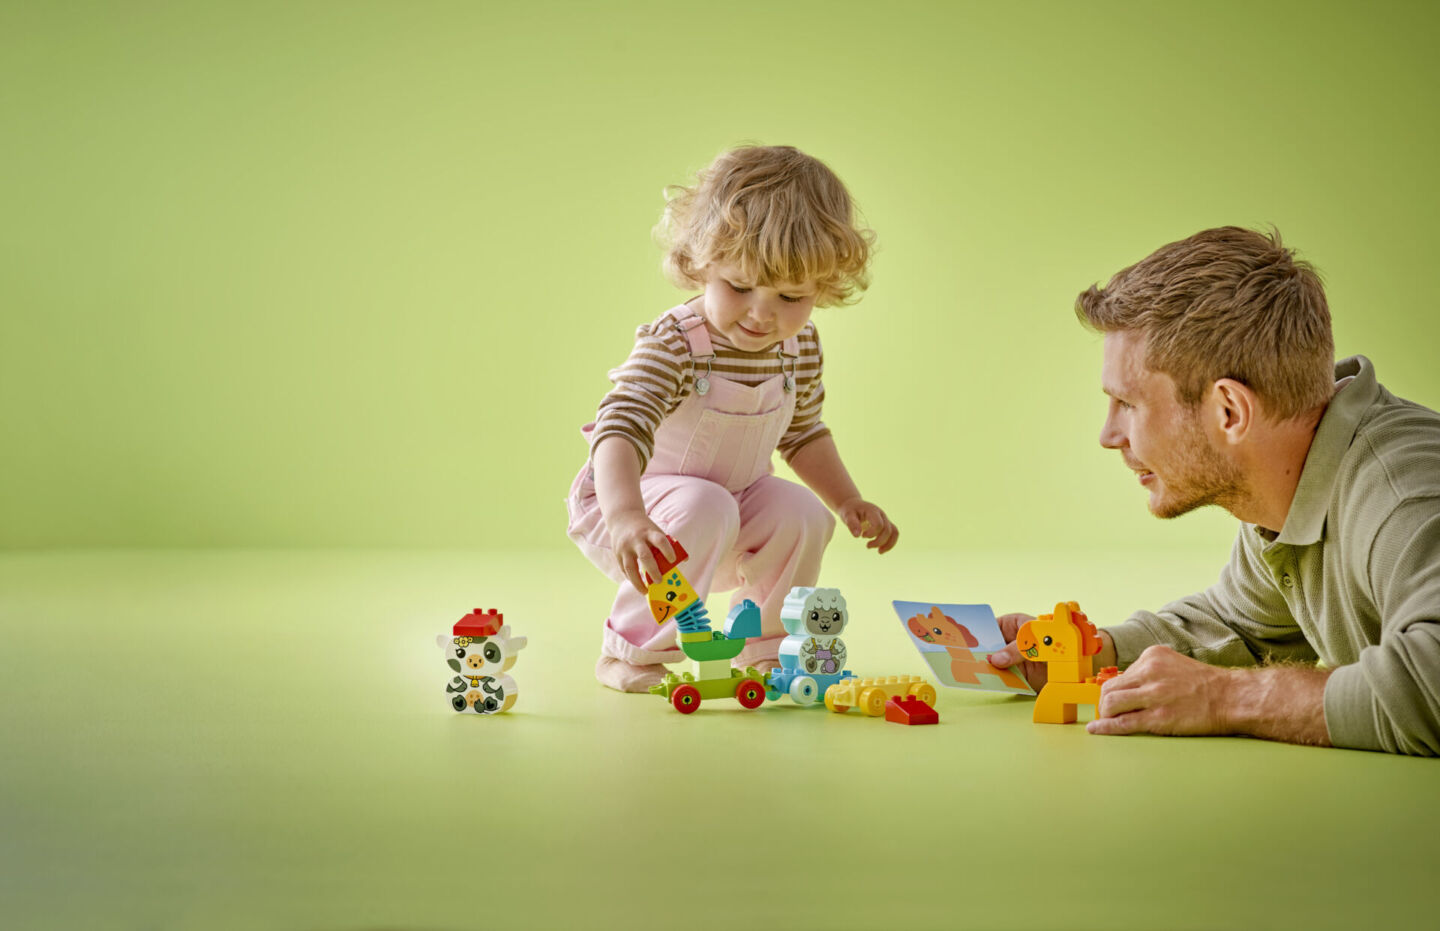 dad and toddler play with LEGO DUPLO set on green background - best toddler birthday gift